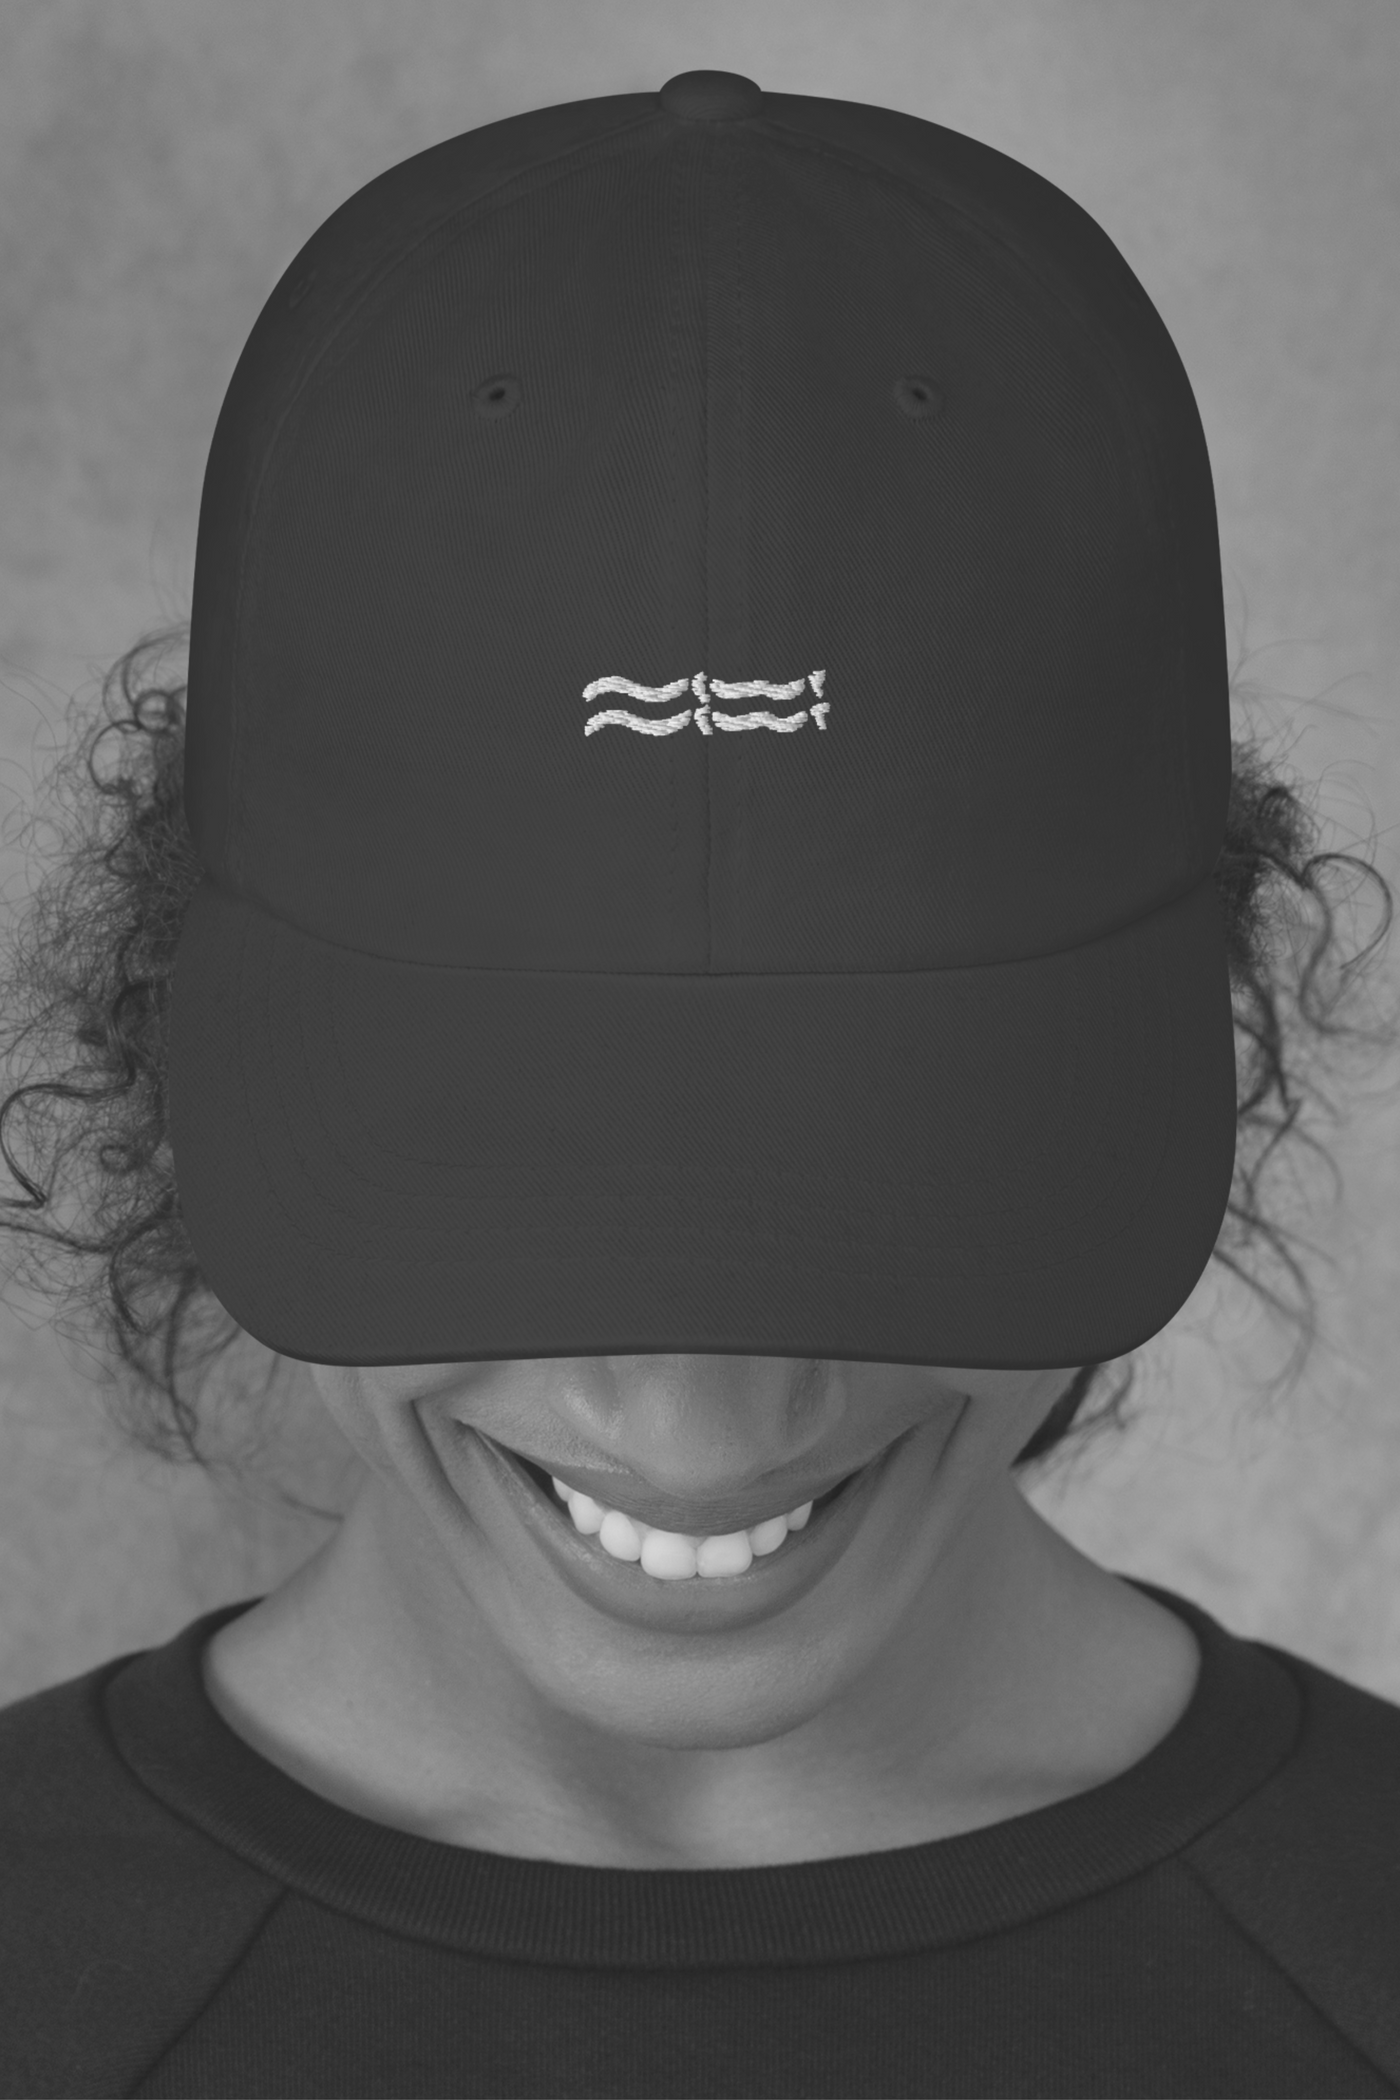 Limited runs of our Newt Hat, you know we pretty much live in these. Check back regularly for new styles and colours. It has an unstructured form, a curved visor, and an adjustable buckle strap. 